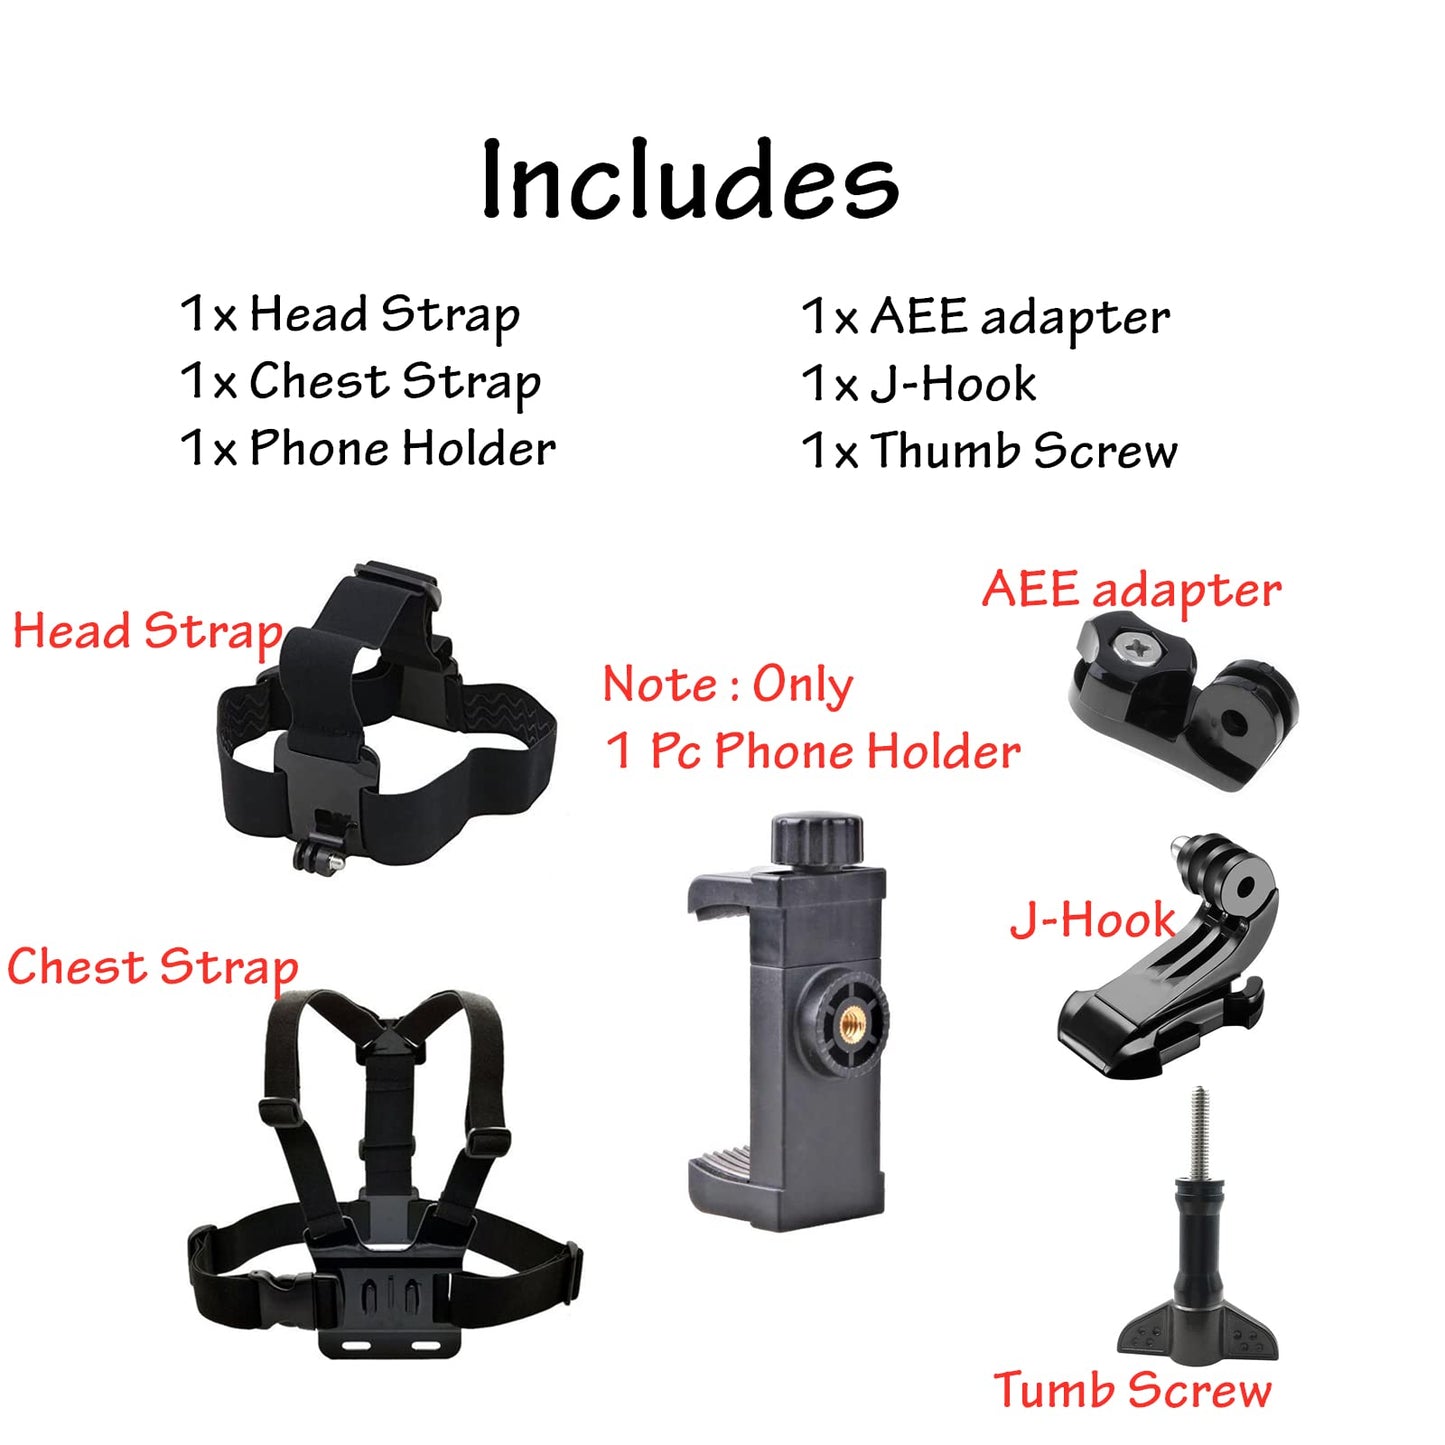 Phone Chest Mount Harness Vest and Head Strap Clip Holder for POV/VLOG, Compatible with iPhone,Samsung,GoPro Hero,DJI Osmo,AKASO and Action Cameras